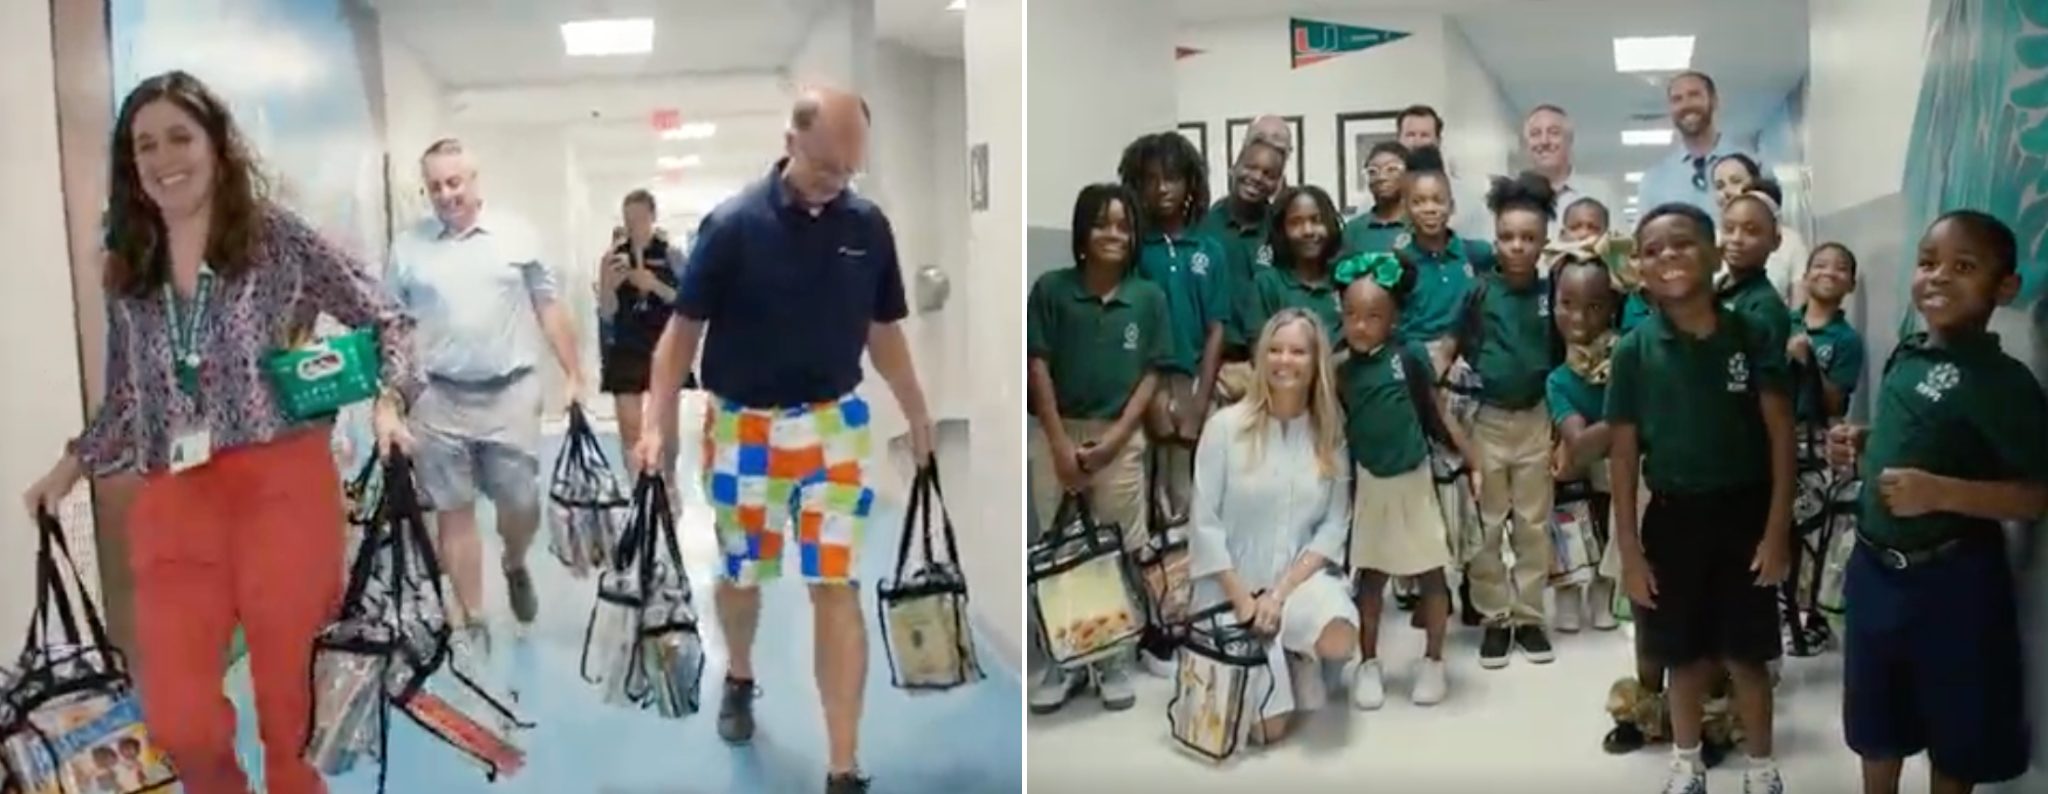 Furyk & Friends PGA Tour Champions event benefits Blessings in a Backpack First Coast Chapter